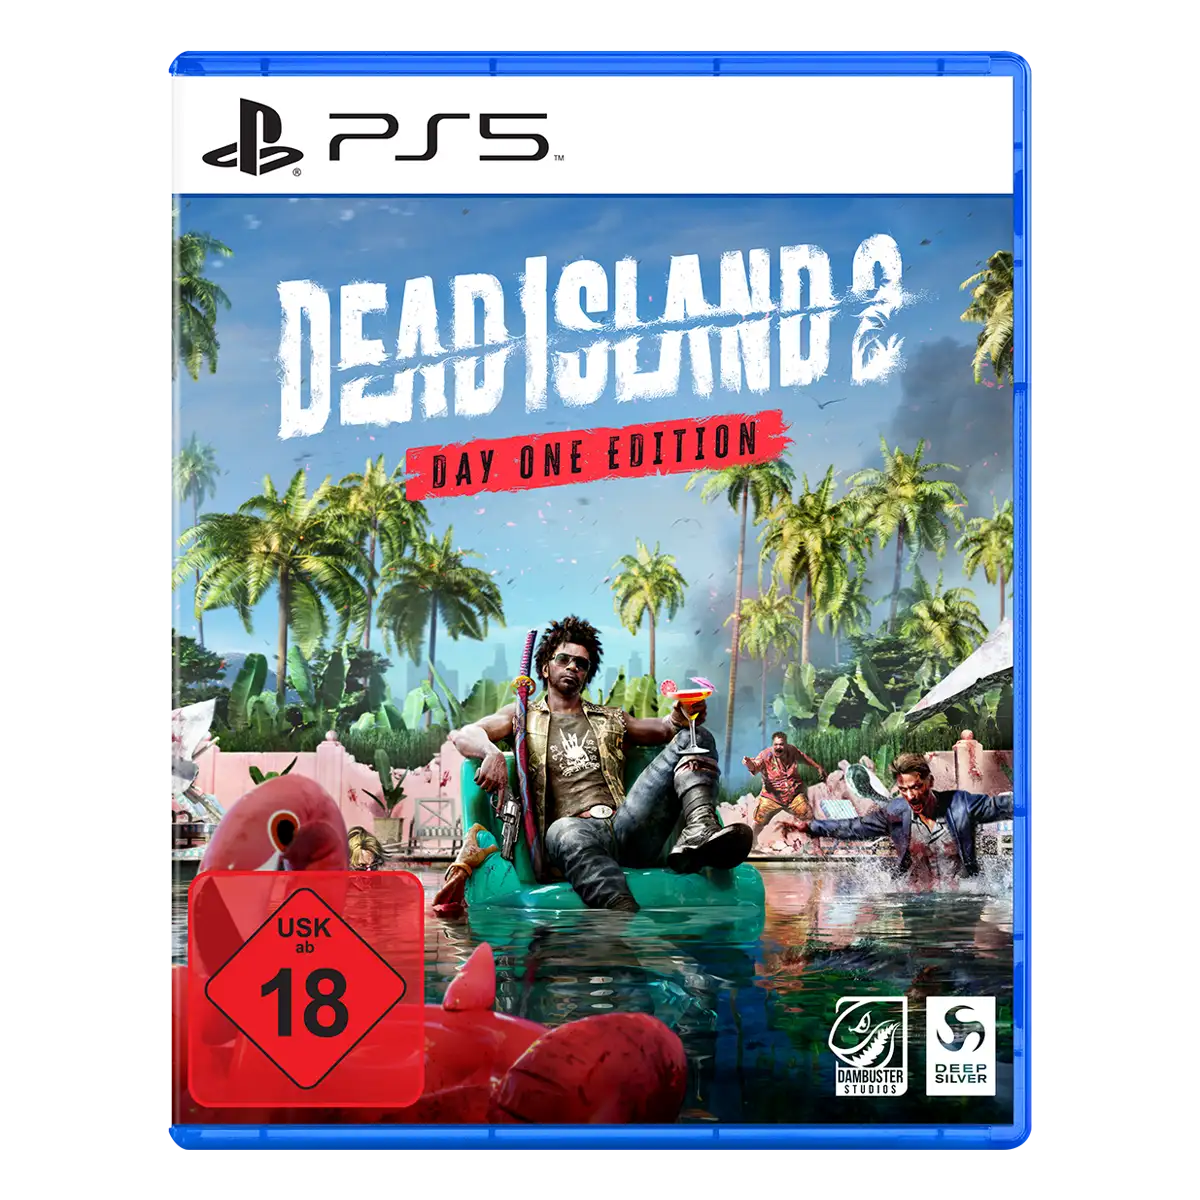 Dead Island 2 Day One Edition (PS5) (USK) Cover